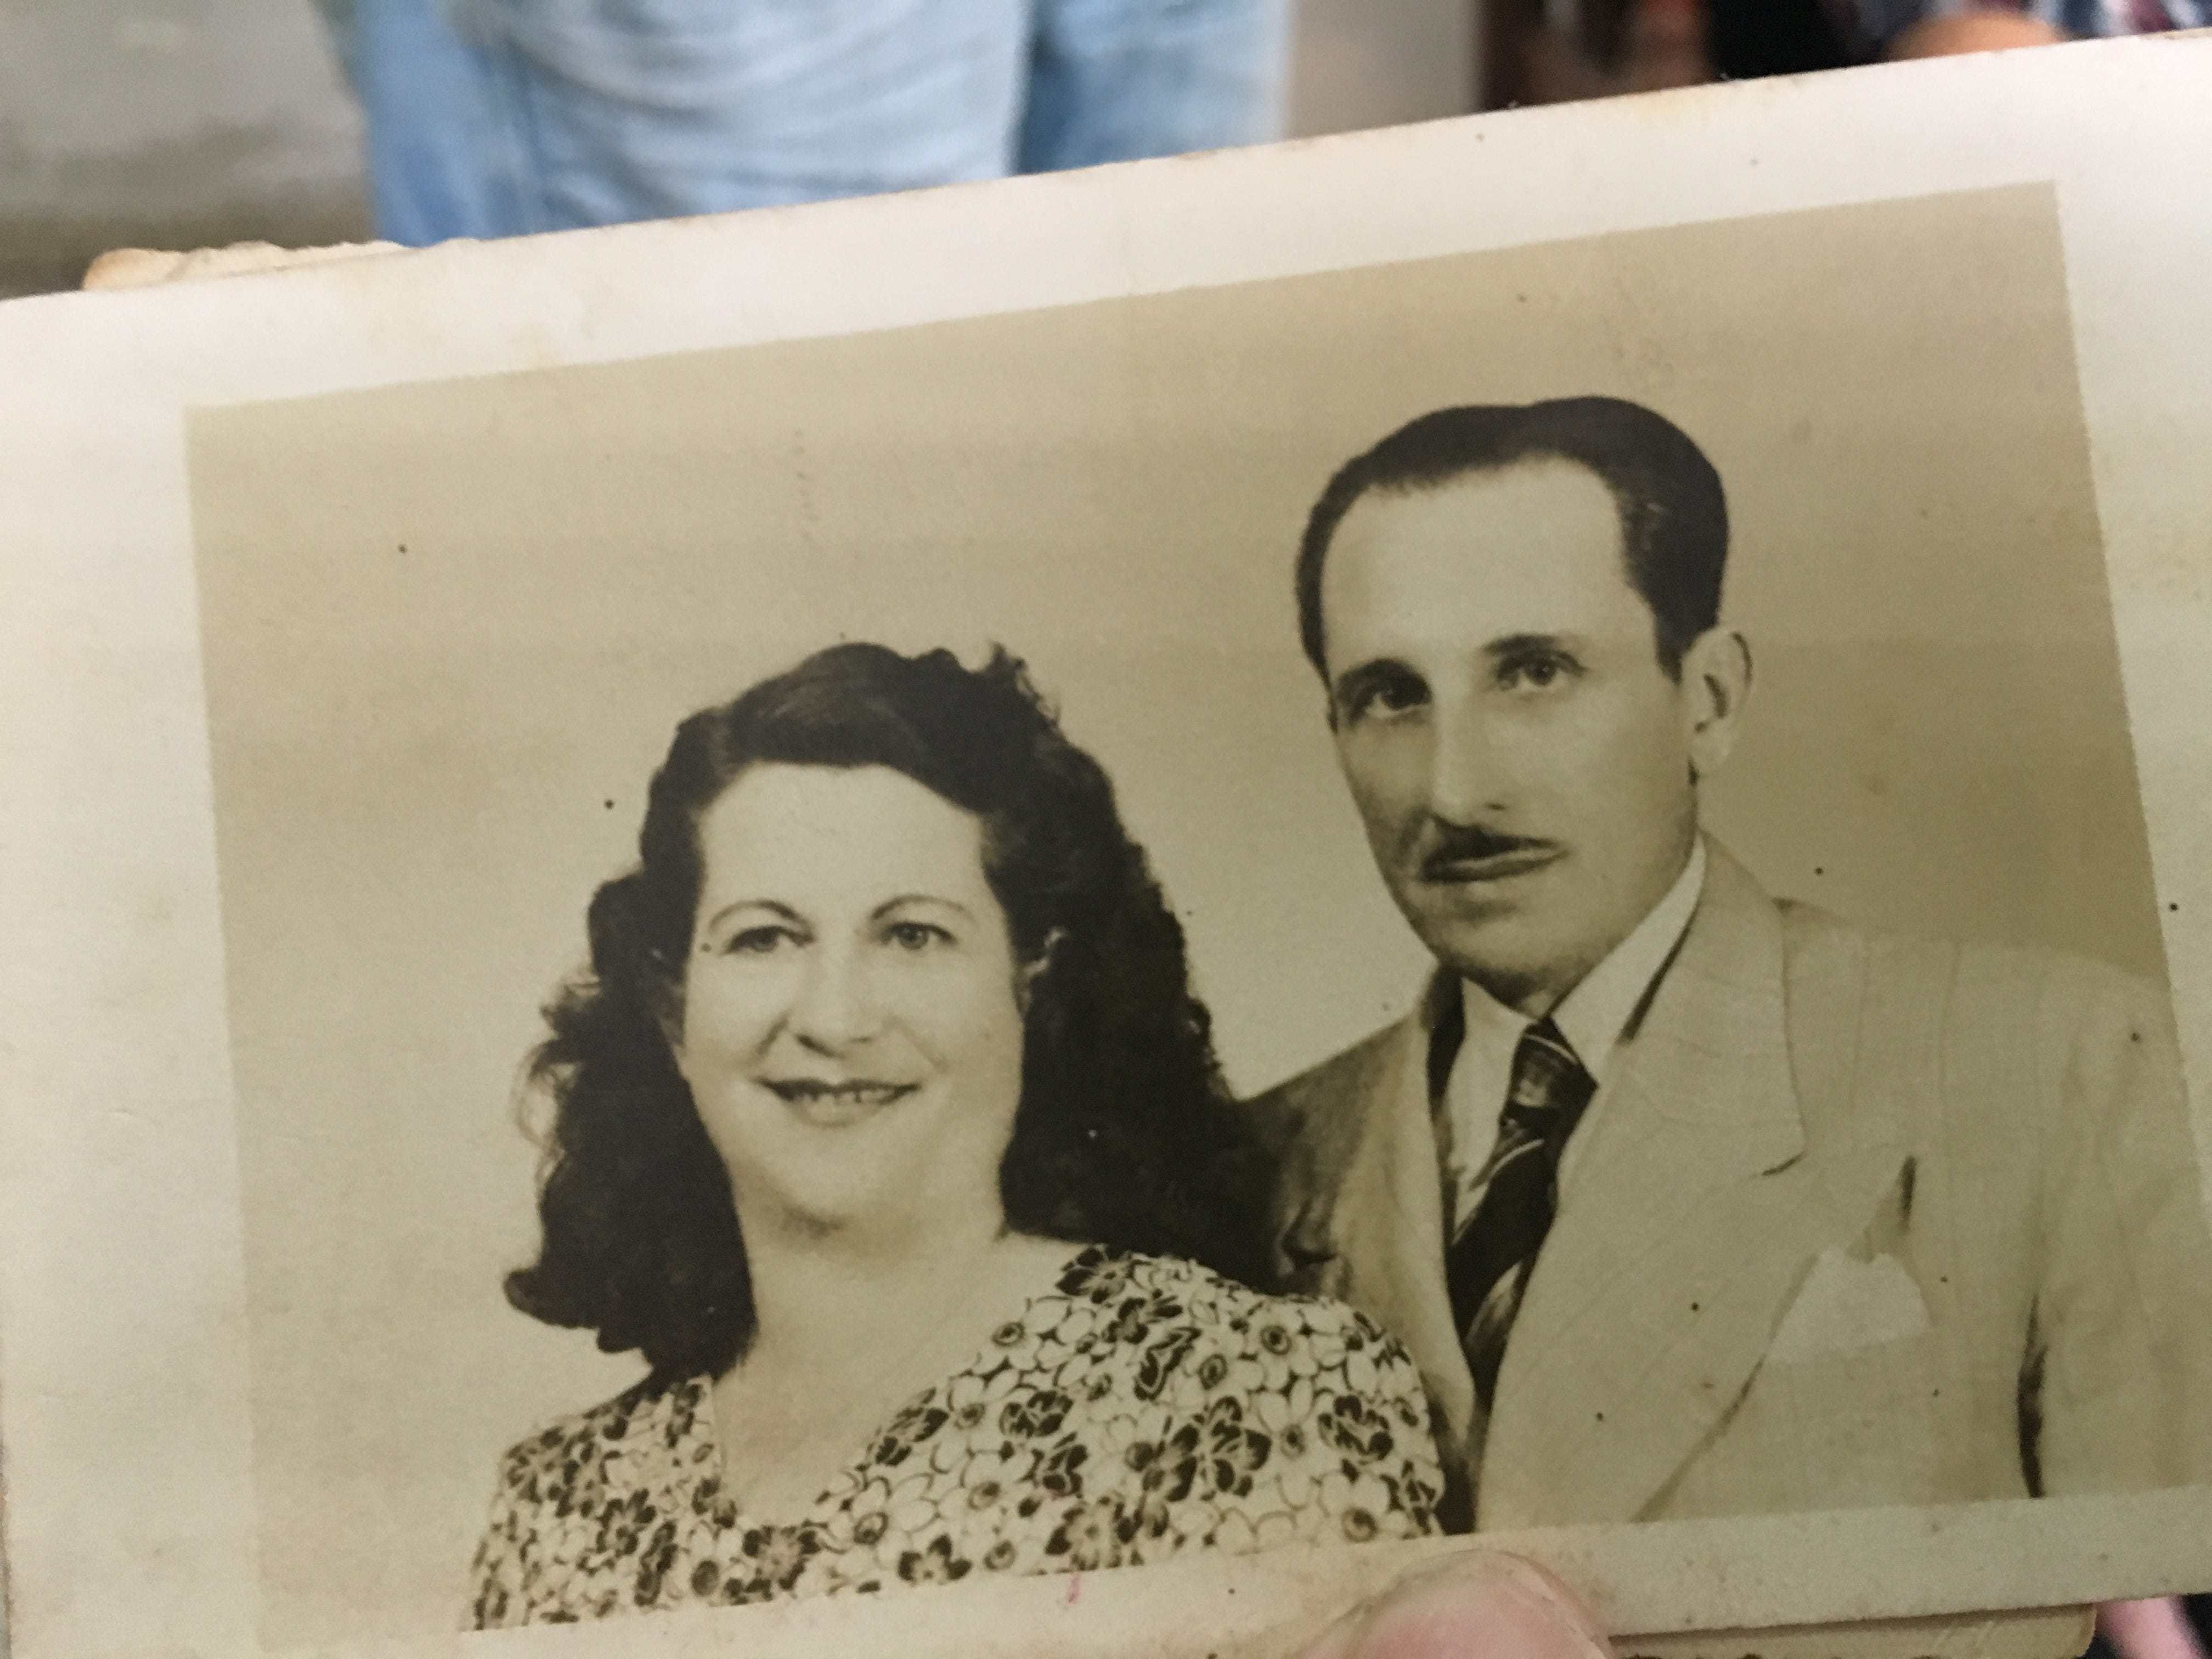 Julia and Marcelino Gonzalez were married in 1924 and lived their life on the family farm in Rodas, Cuba. They stayed behind in Cuba when half of their family left, knowing they were needed to help support other family members on the island.